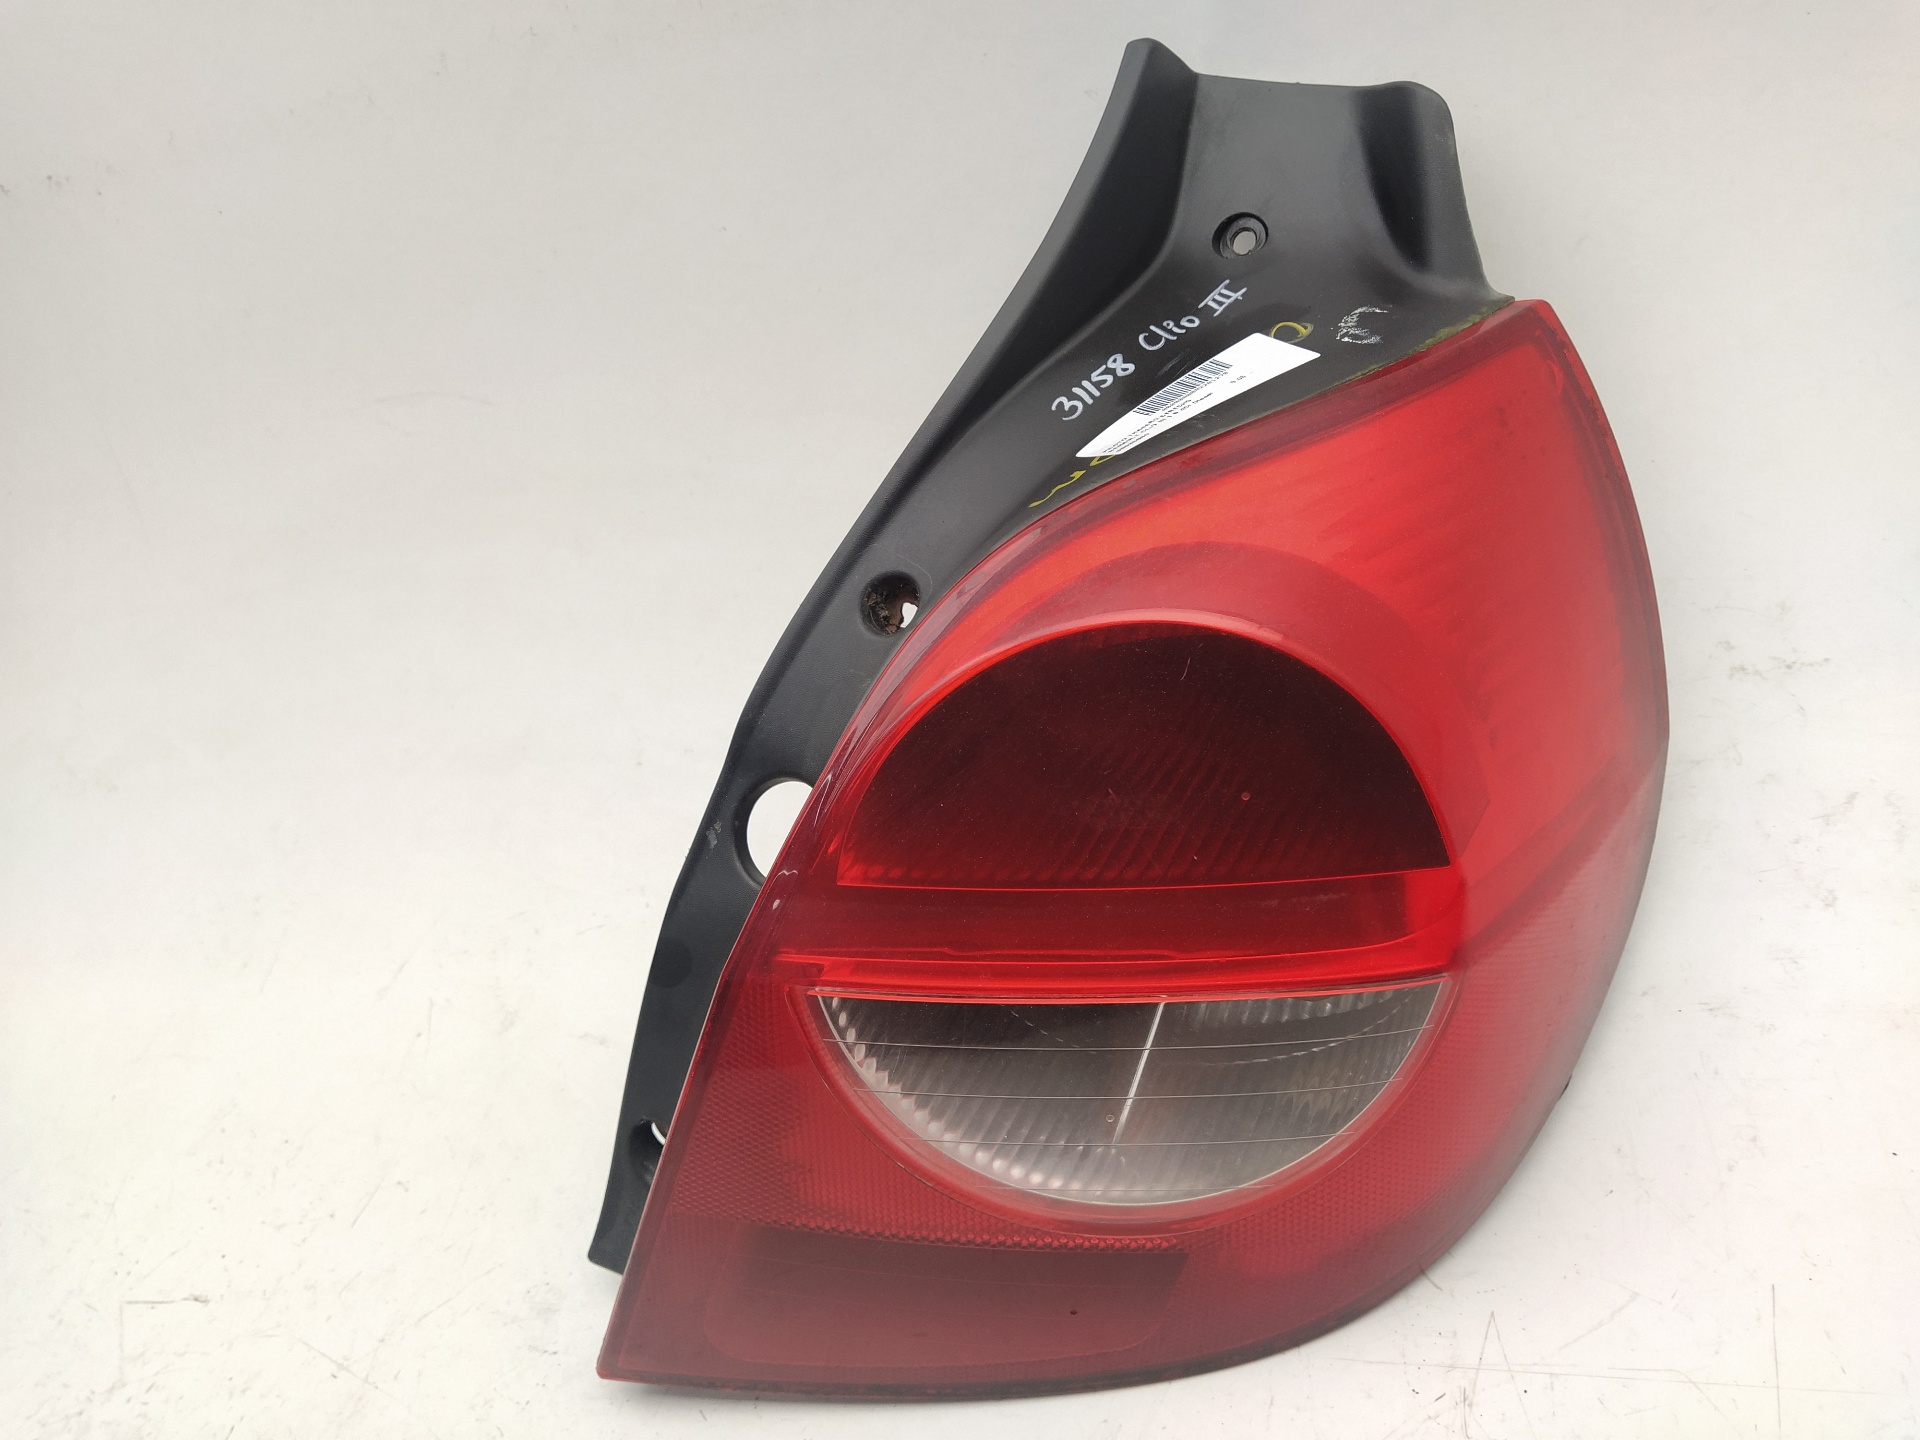 RENAULT Clio 3 generation (2005-2012) Rear Right Taillight Lamp 89035080 22652990